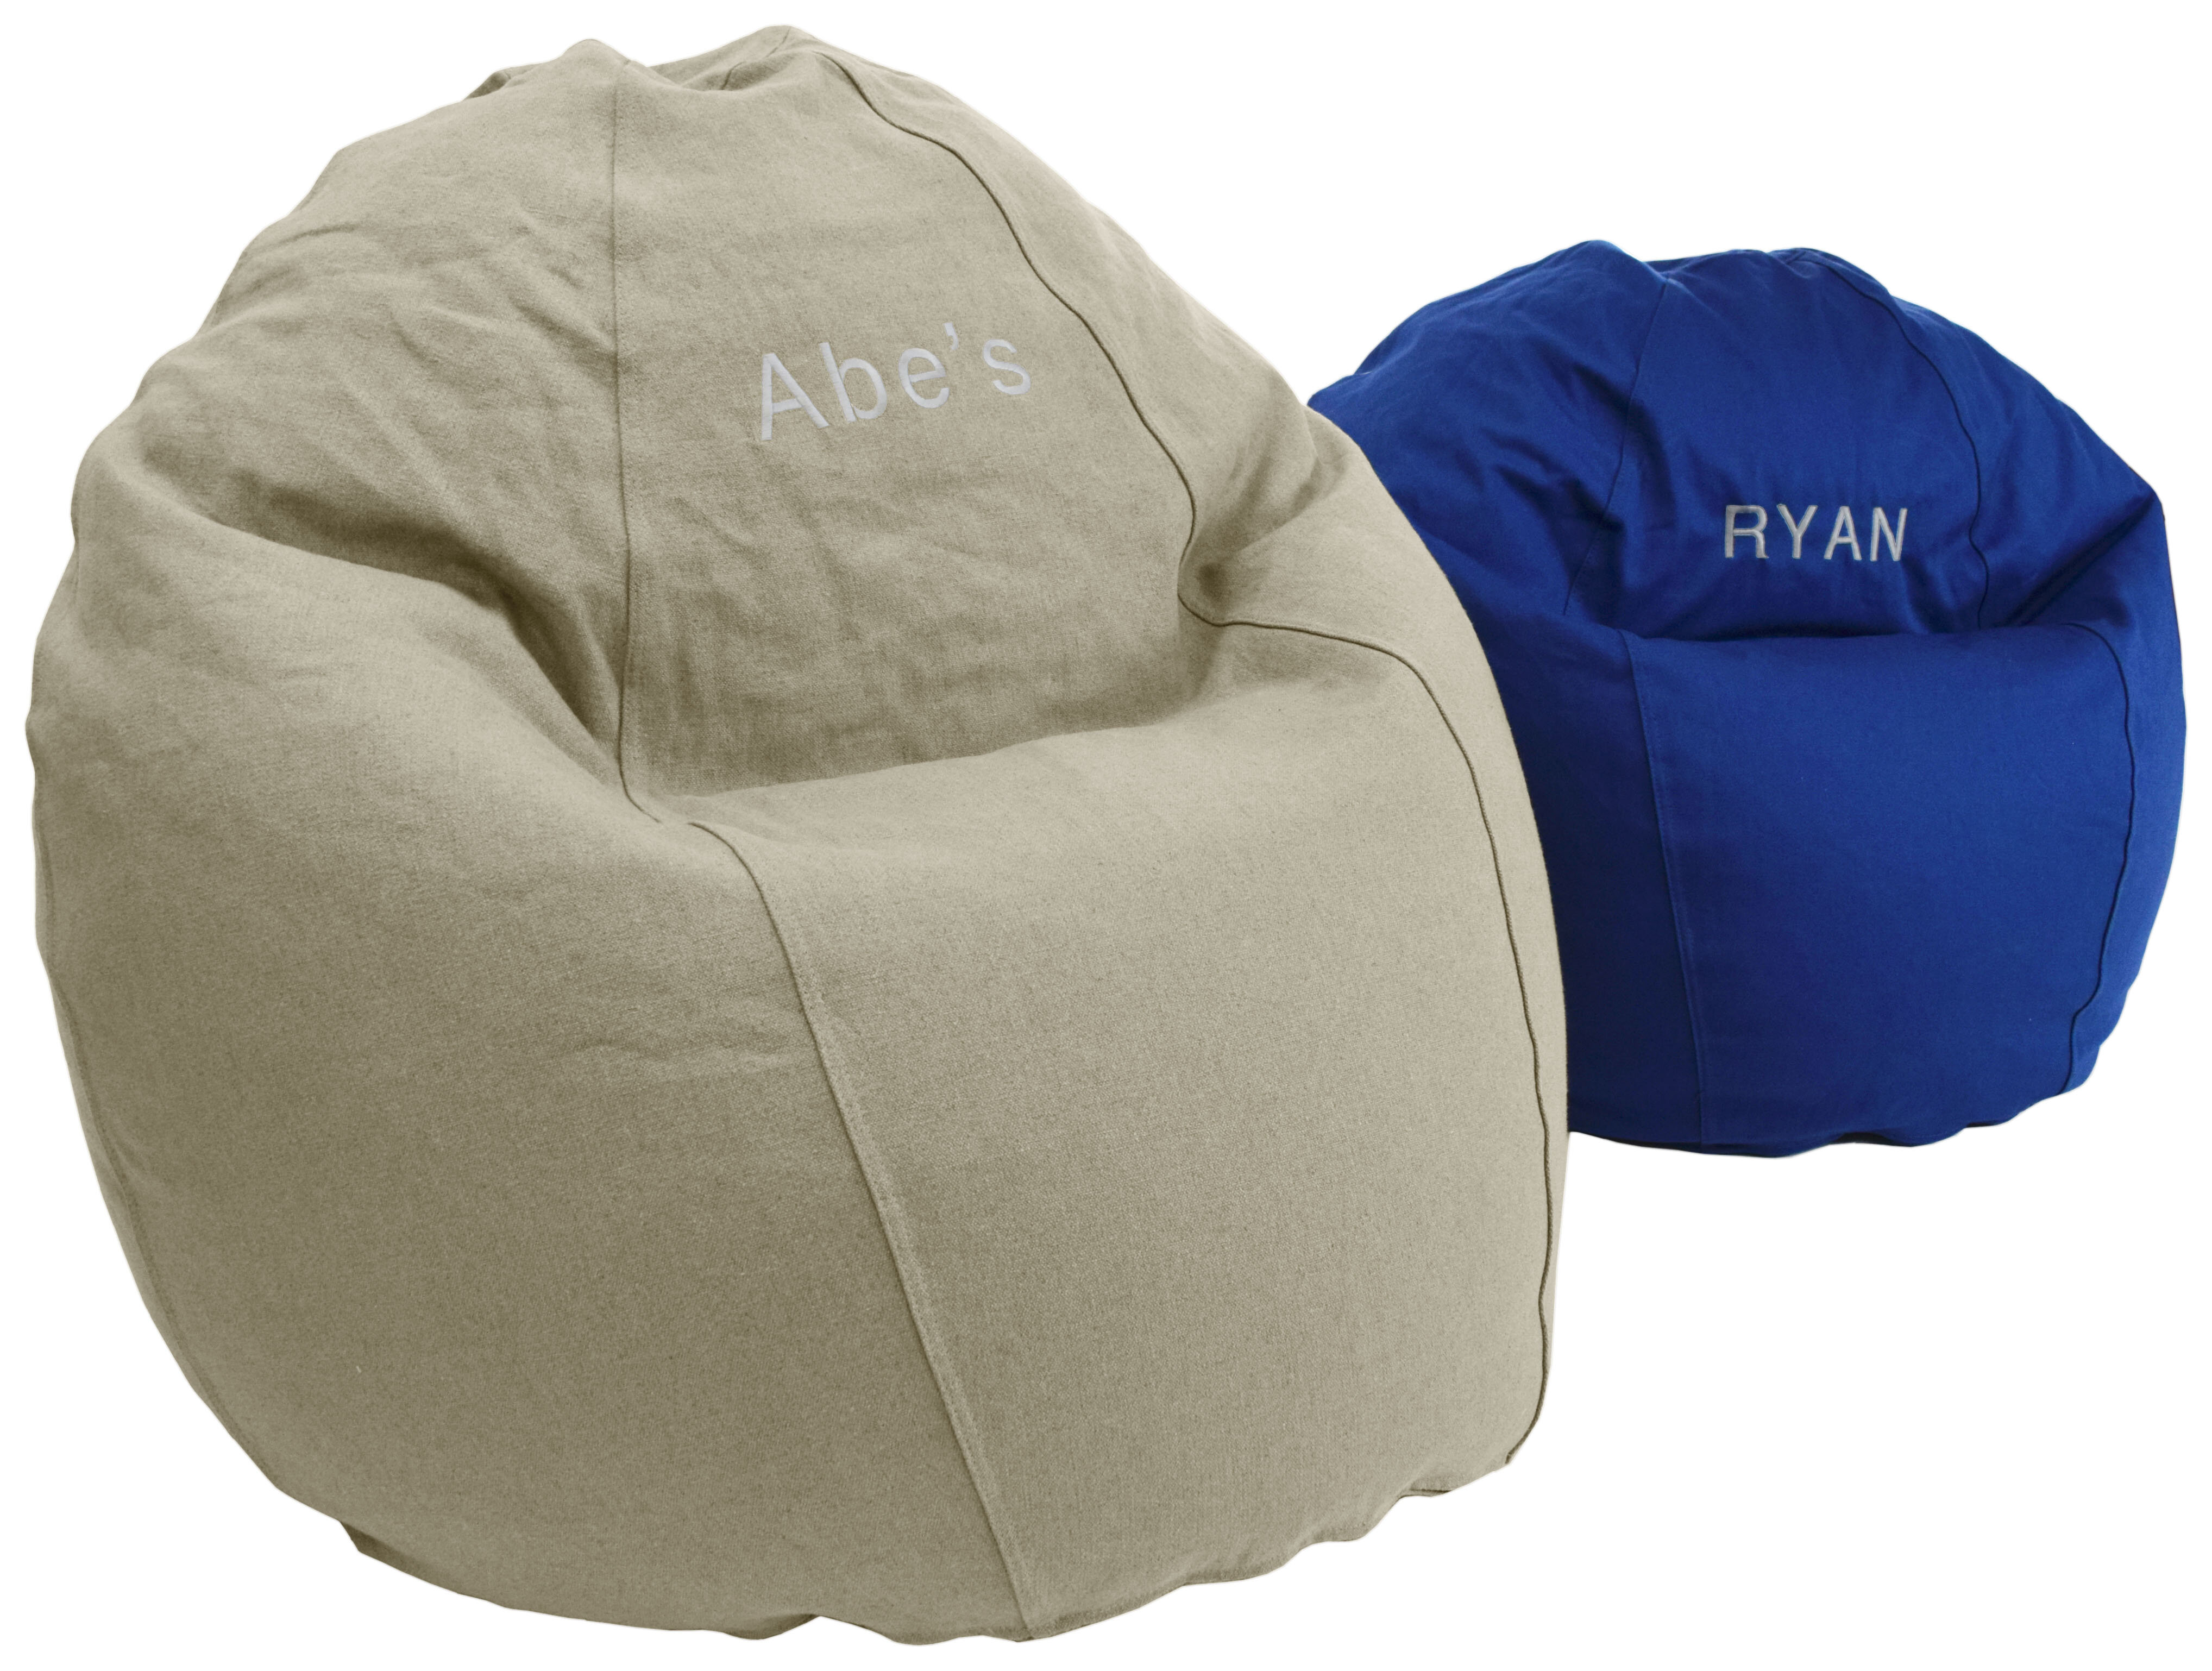 Vplanet® Organic Cotton Bean Bag and Pouffe, with Beans (XL, Grey D  Pattern) : Amazon.in: Home & Kitchen